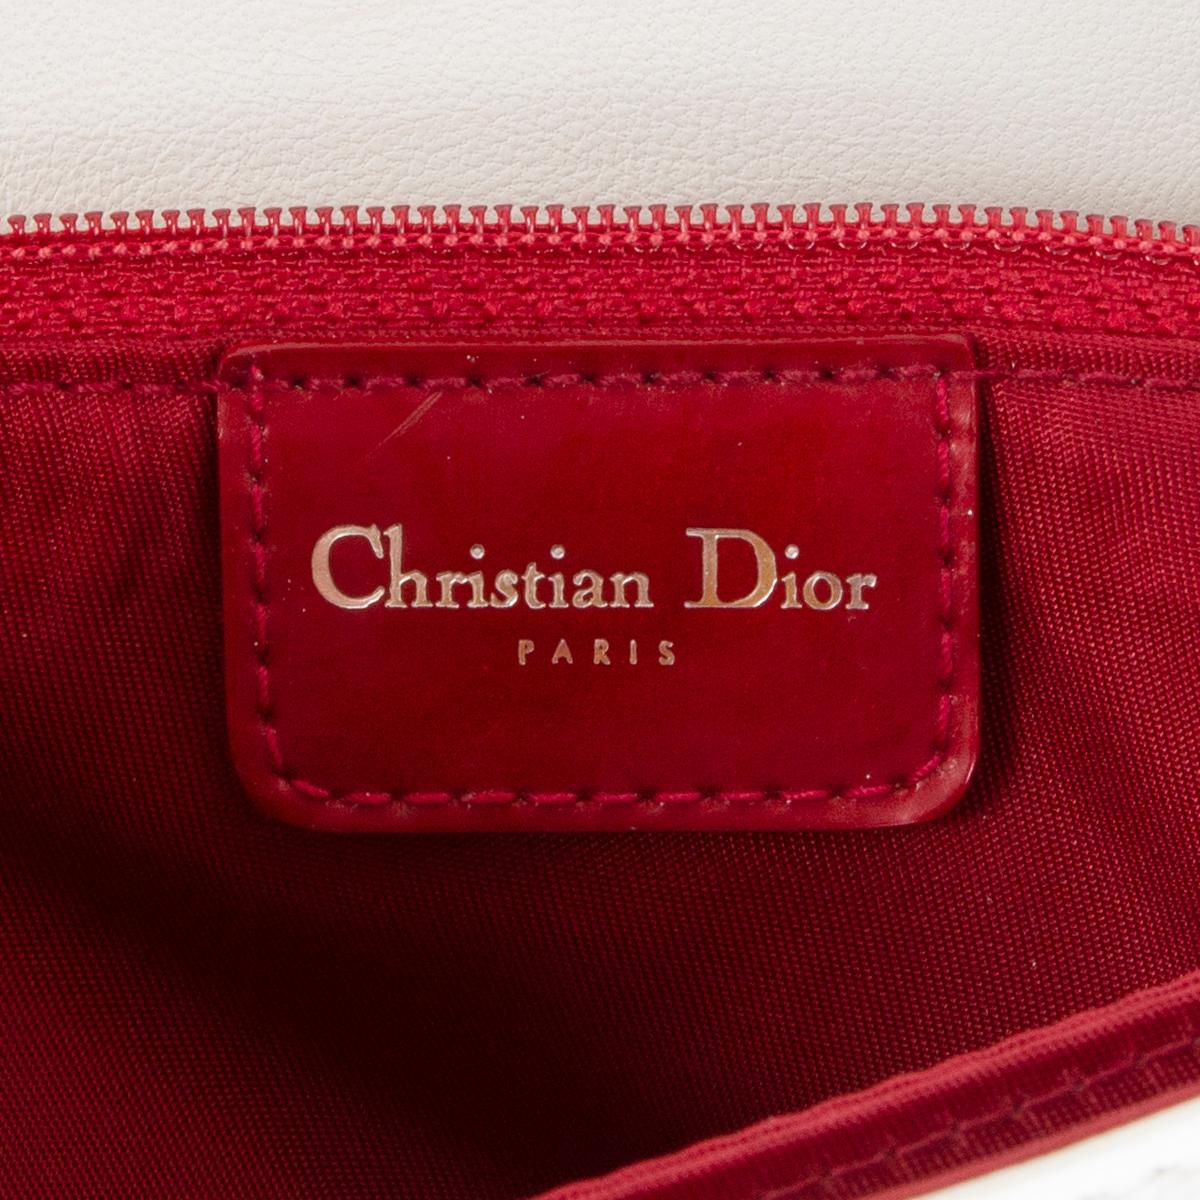 Women's CHRISTIAN DIOR white leather & red patent CADILLAC SADDLE Shoulder Bag